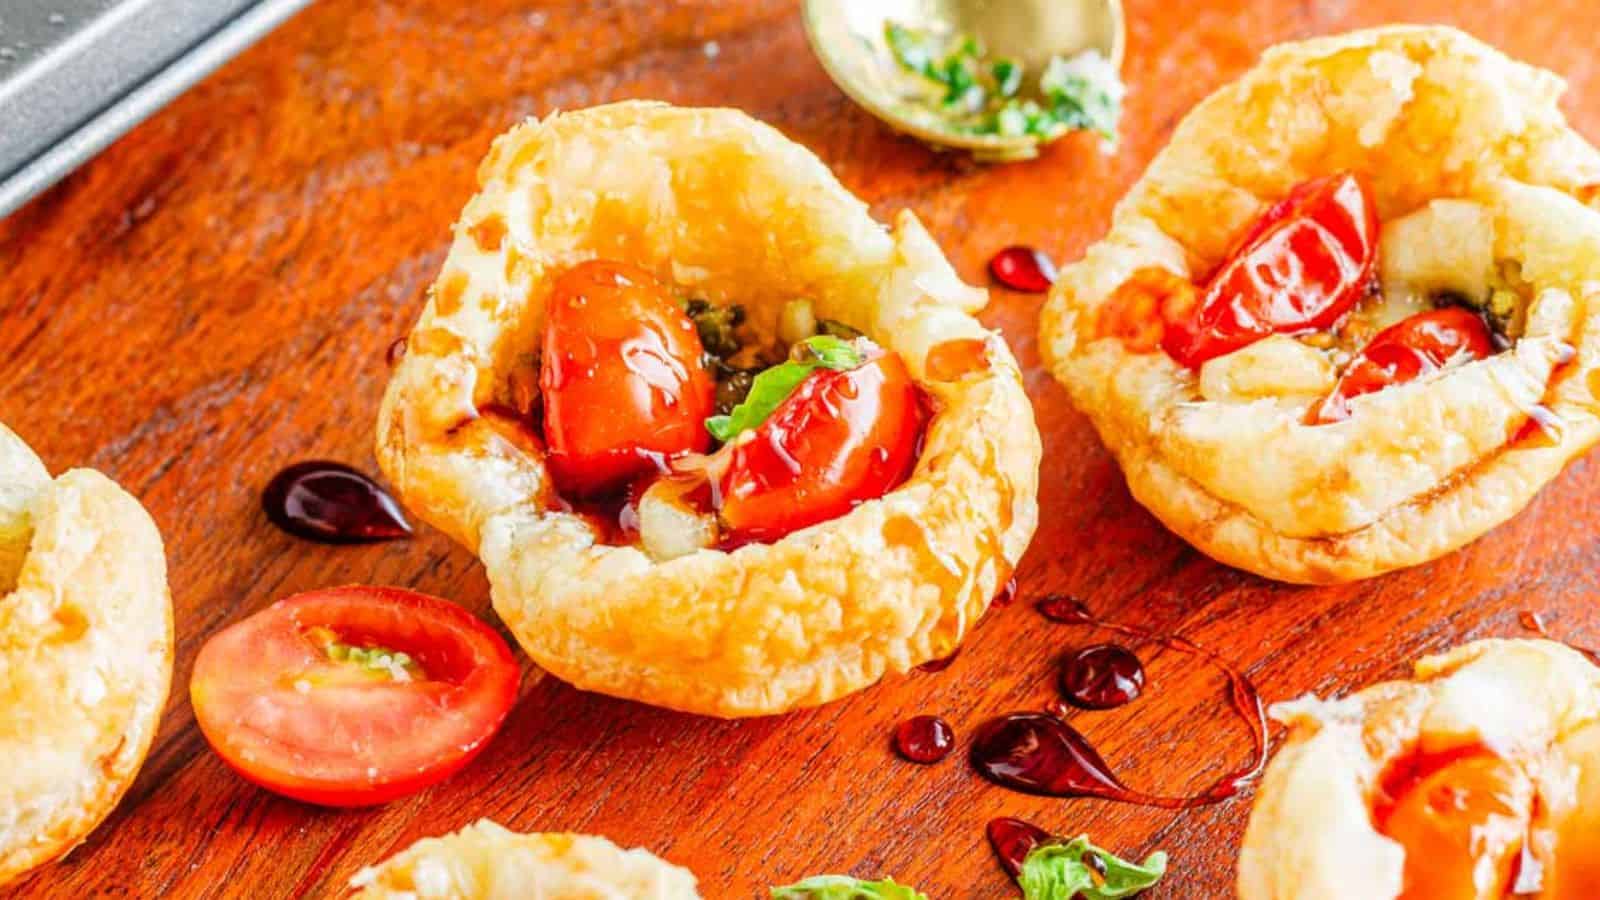 That Good Appetizers: 13 Recipes That'll Knock Your Socks Off